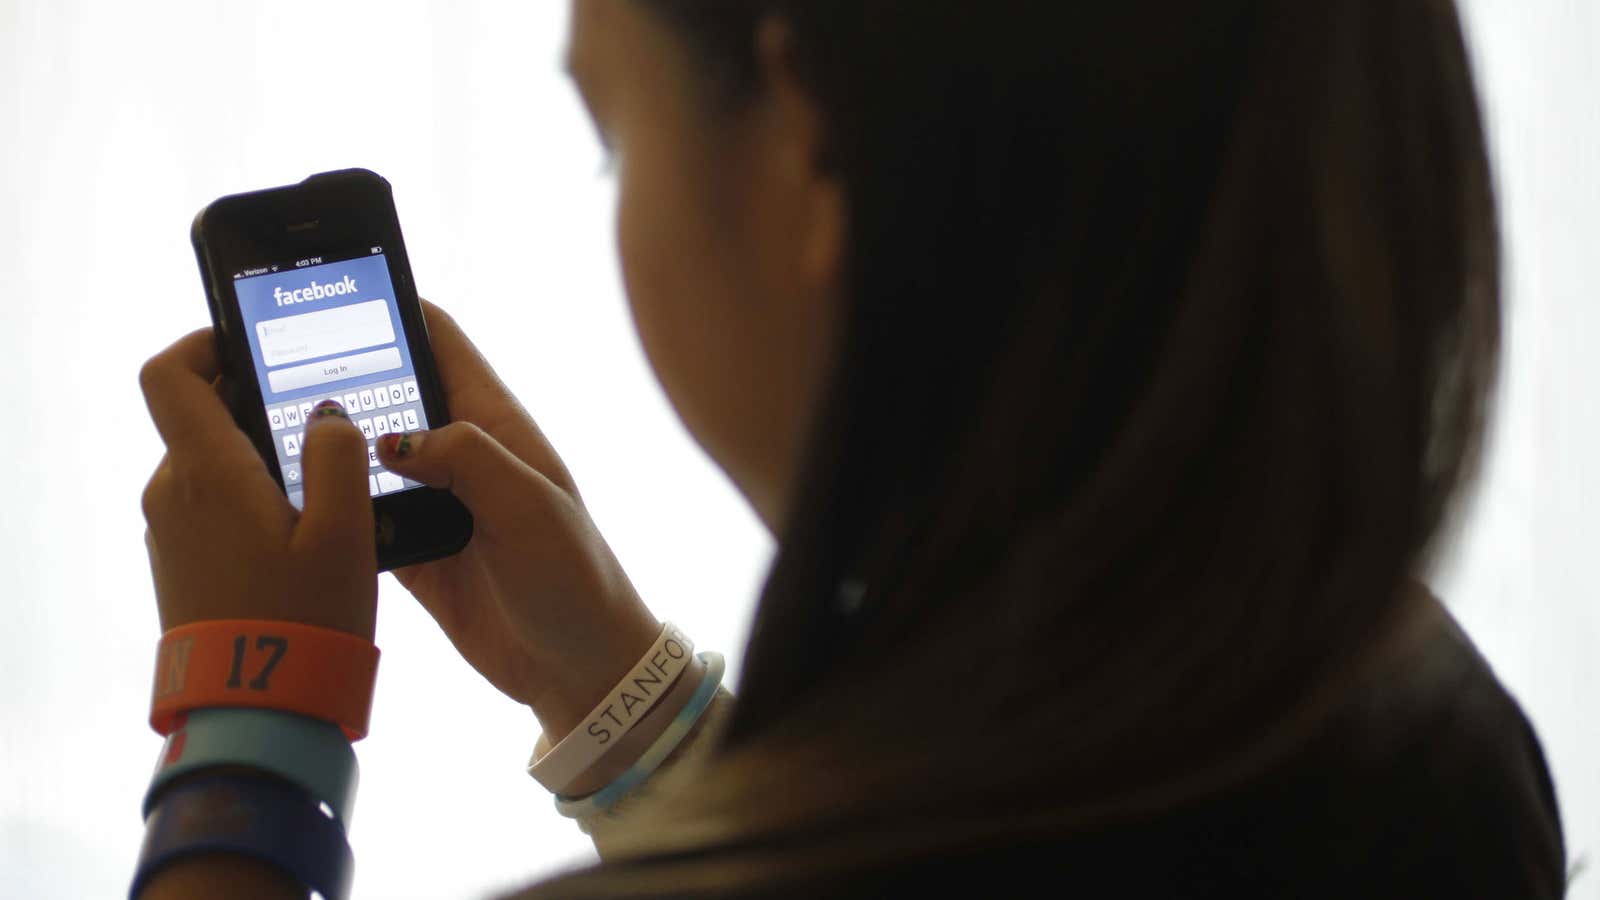 Certain Facebook behavior, such as untagging, may be telling of eating disorders.